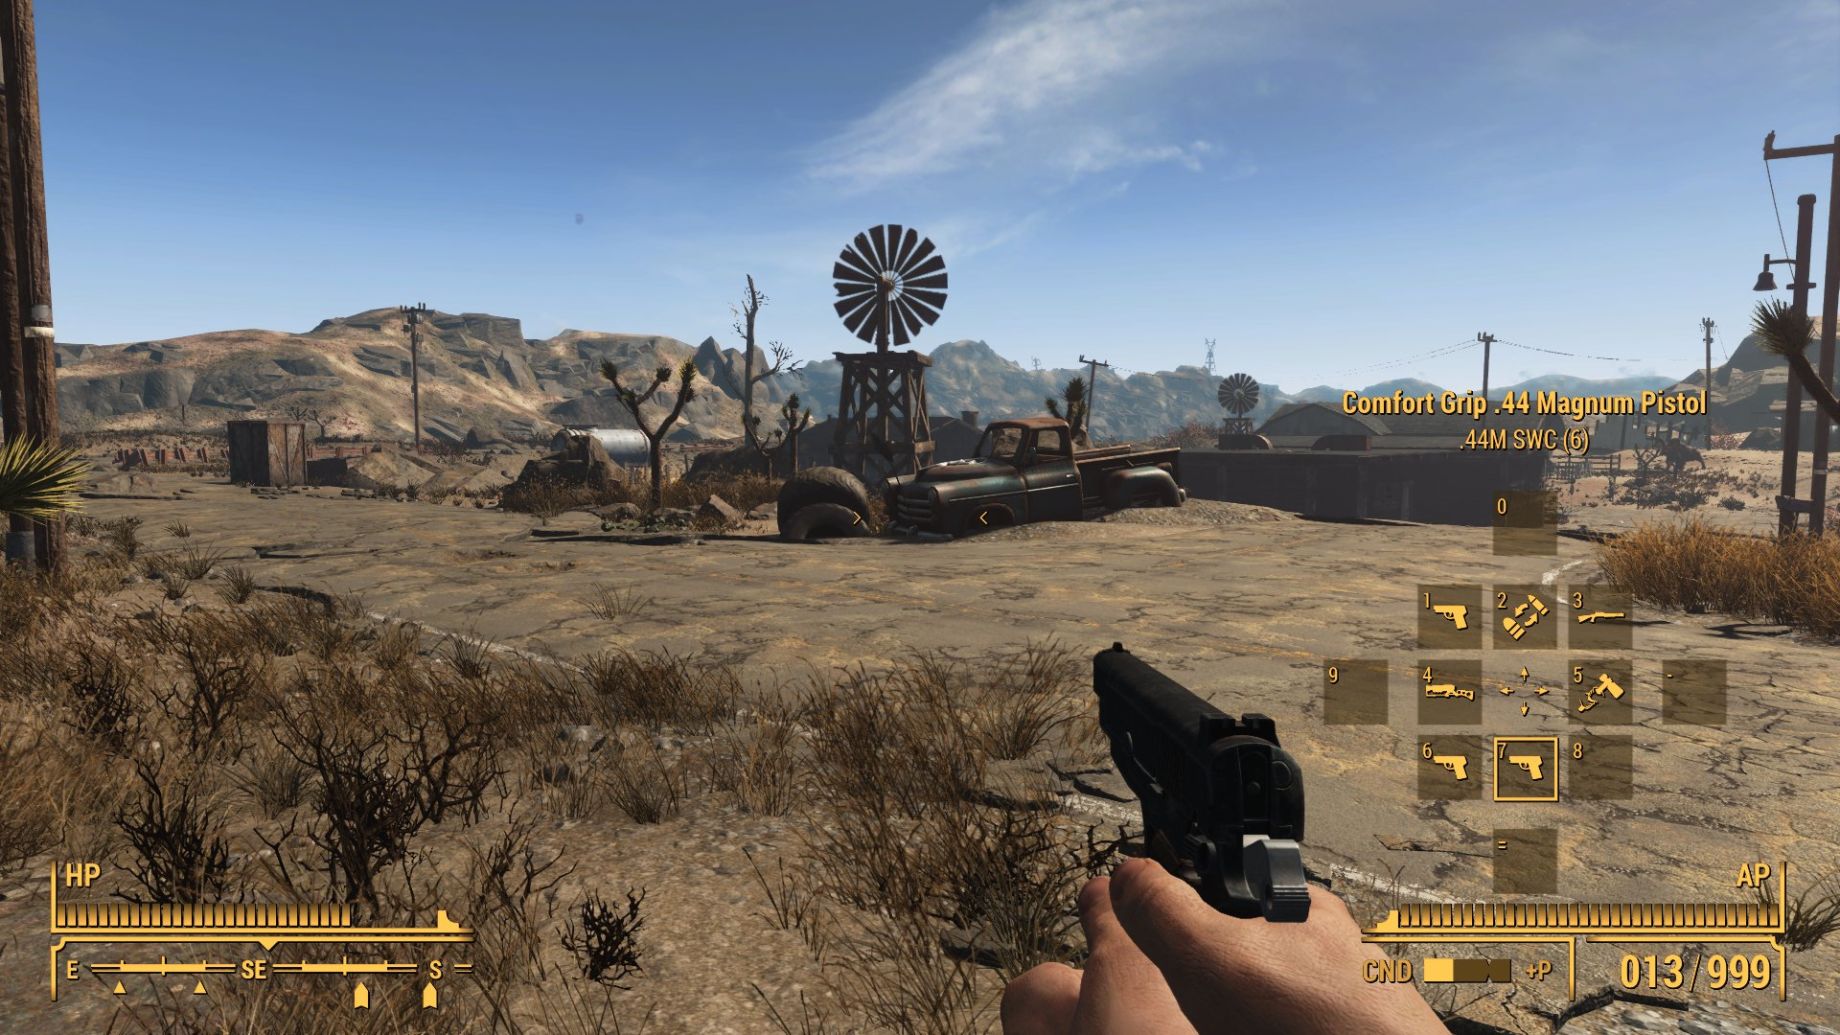 Fallout New Vegas Billboards HD Remade Mod - Download